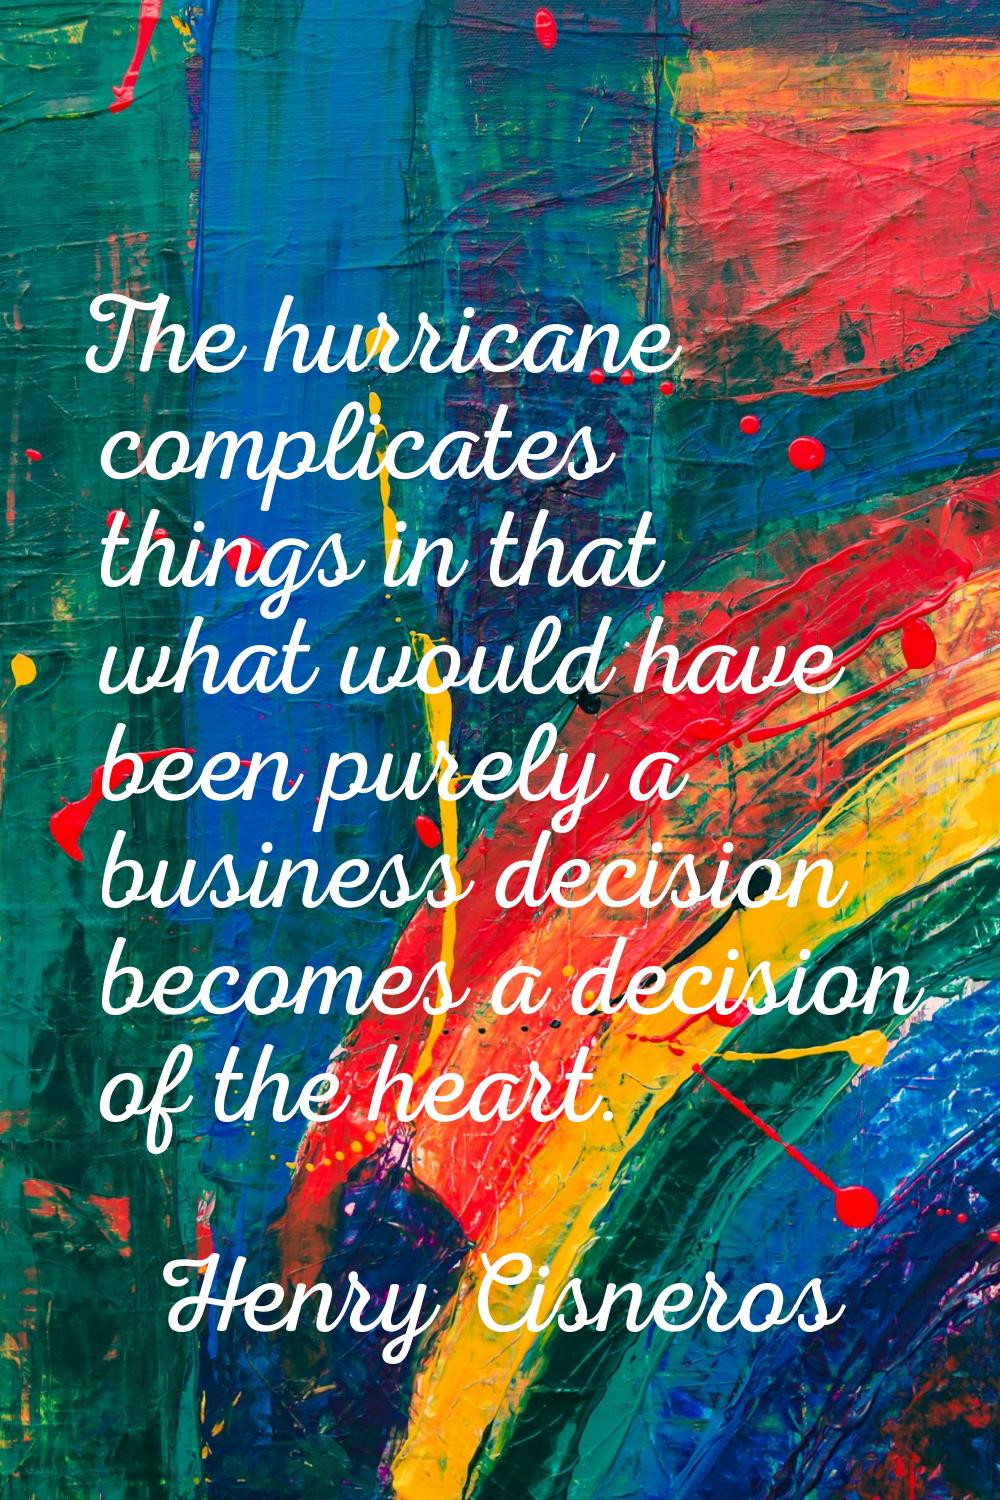 The hurricane complicates things in that what would have been purely a business decision becomes a 